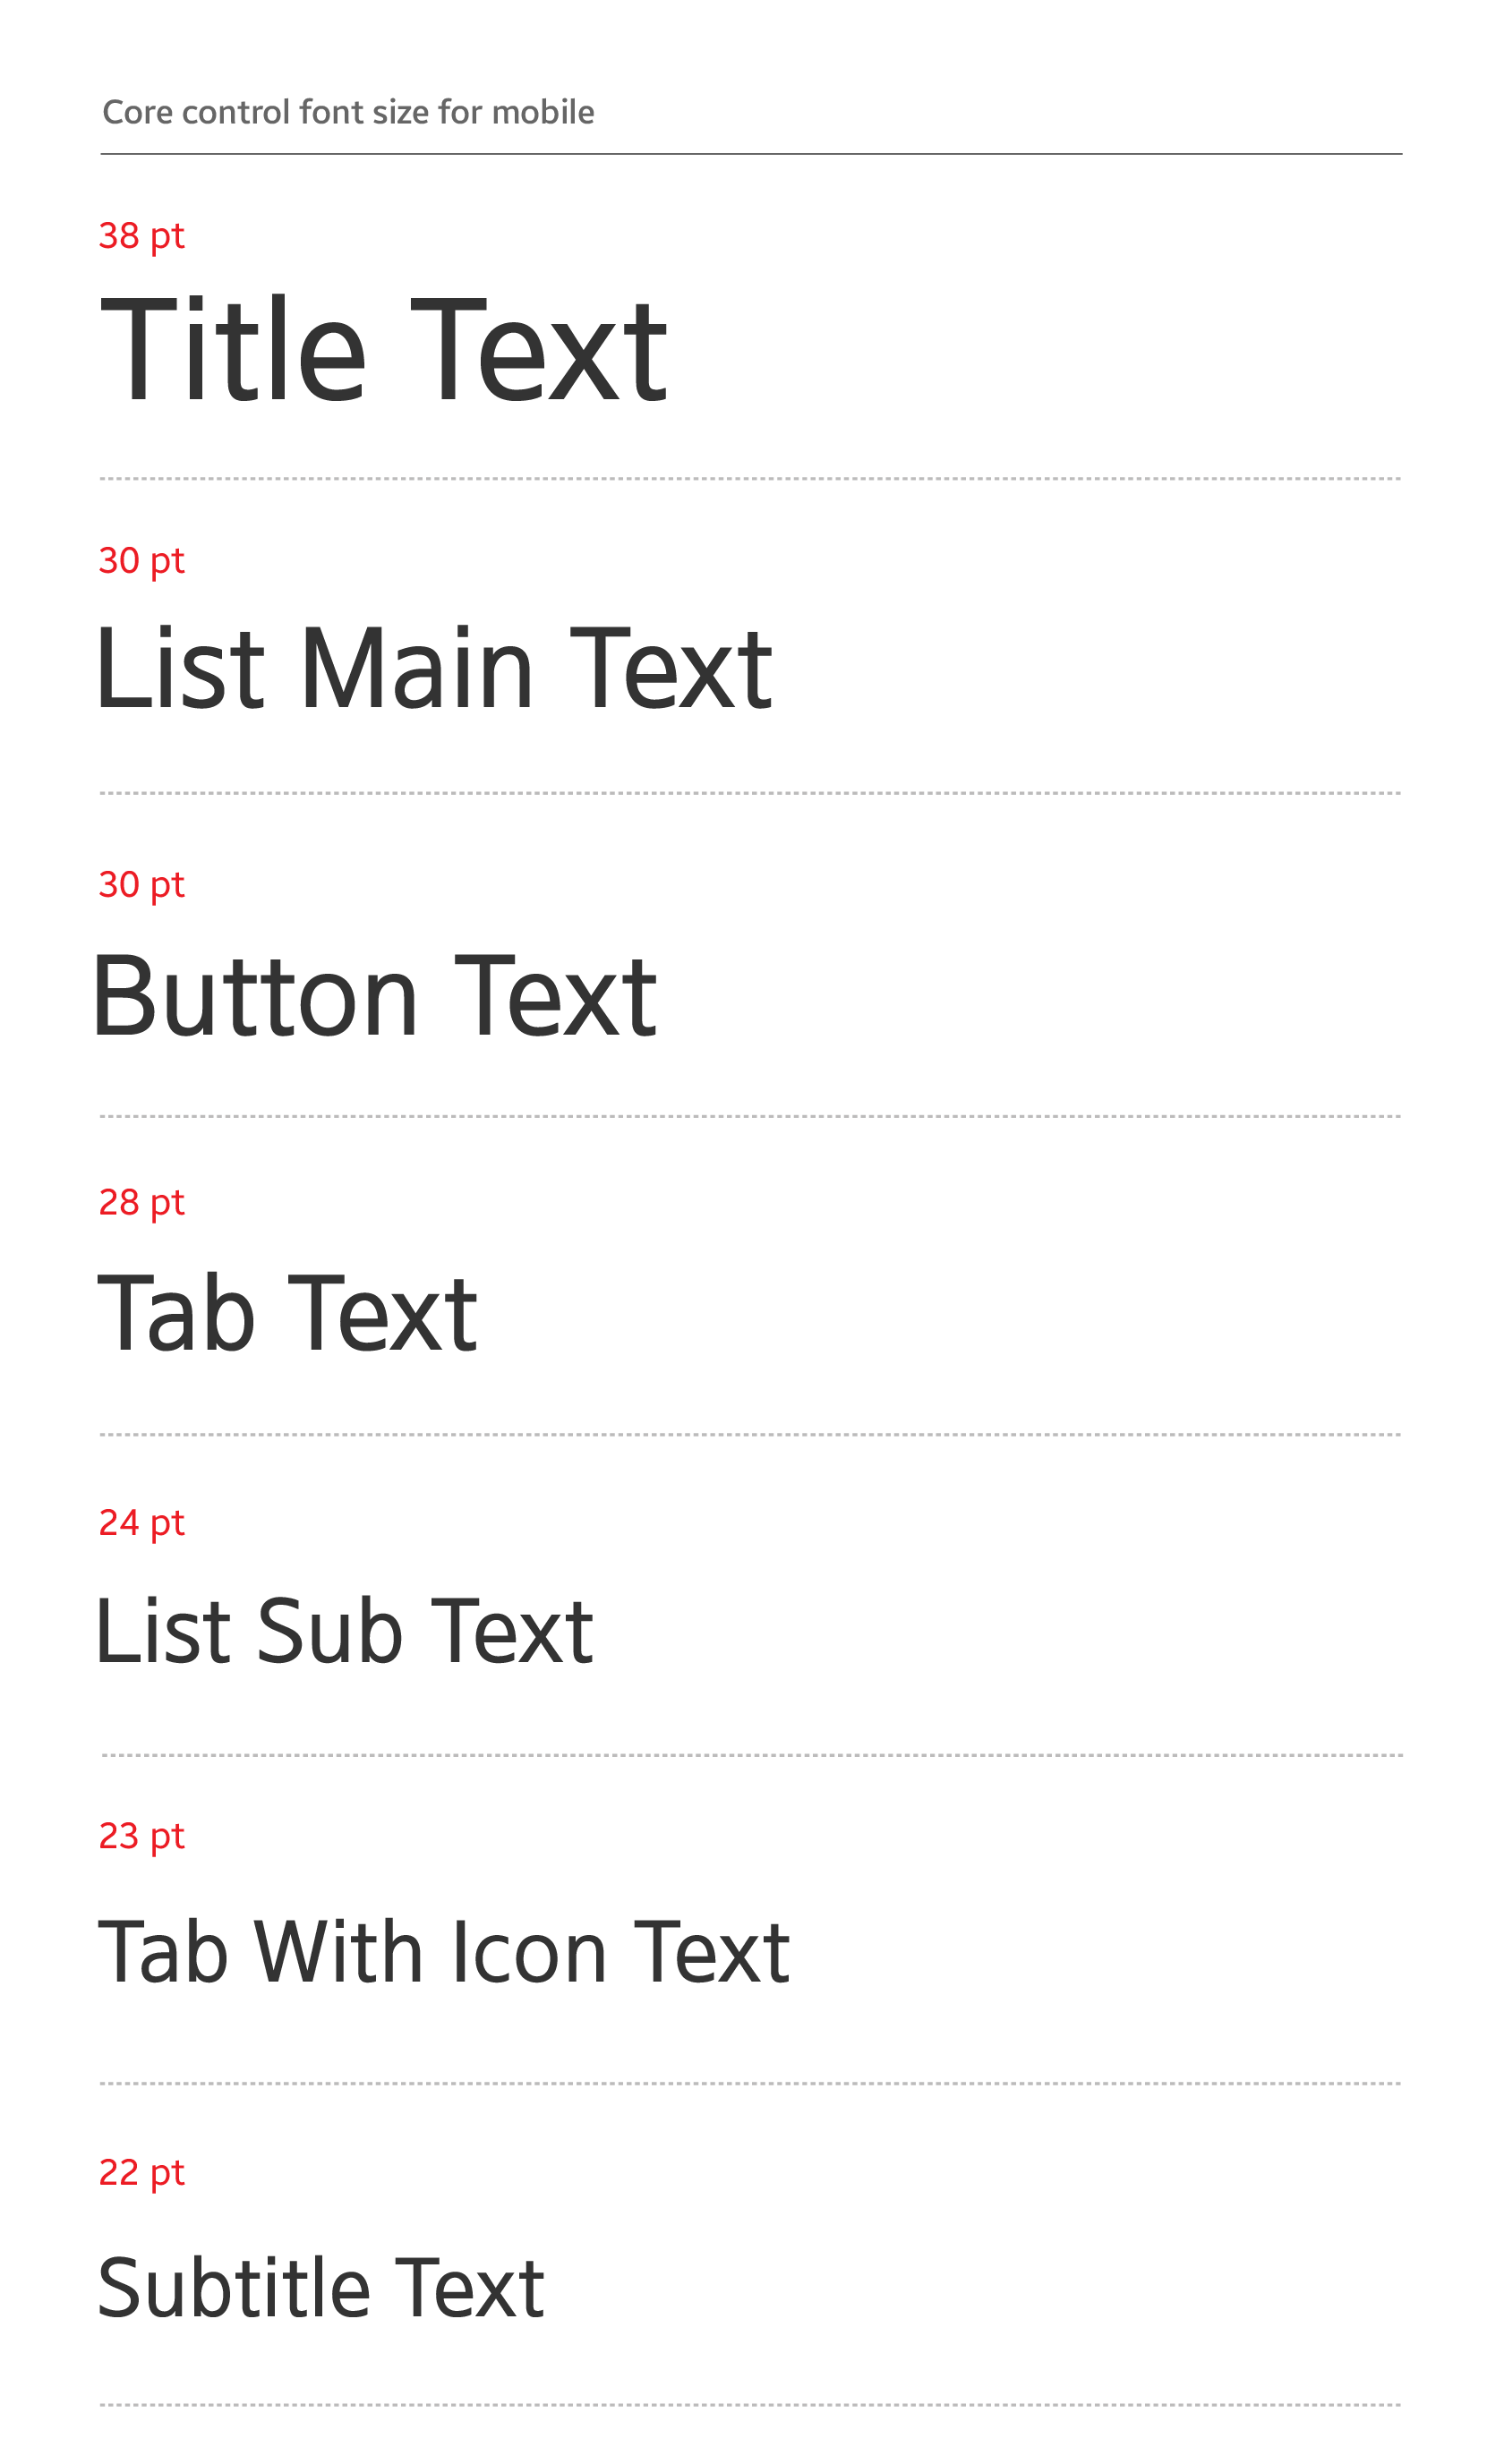 Recommended font sizes for the mobile and wearable app designs